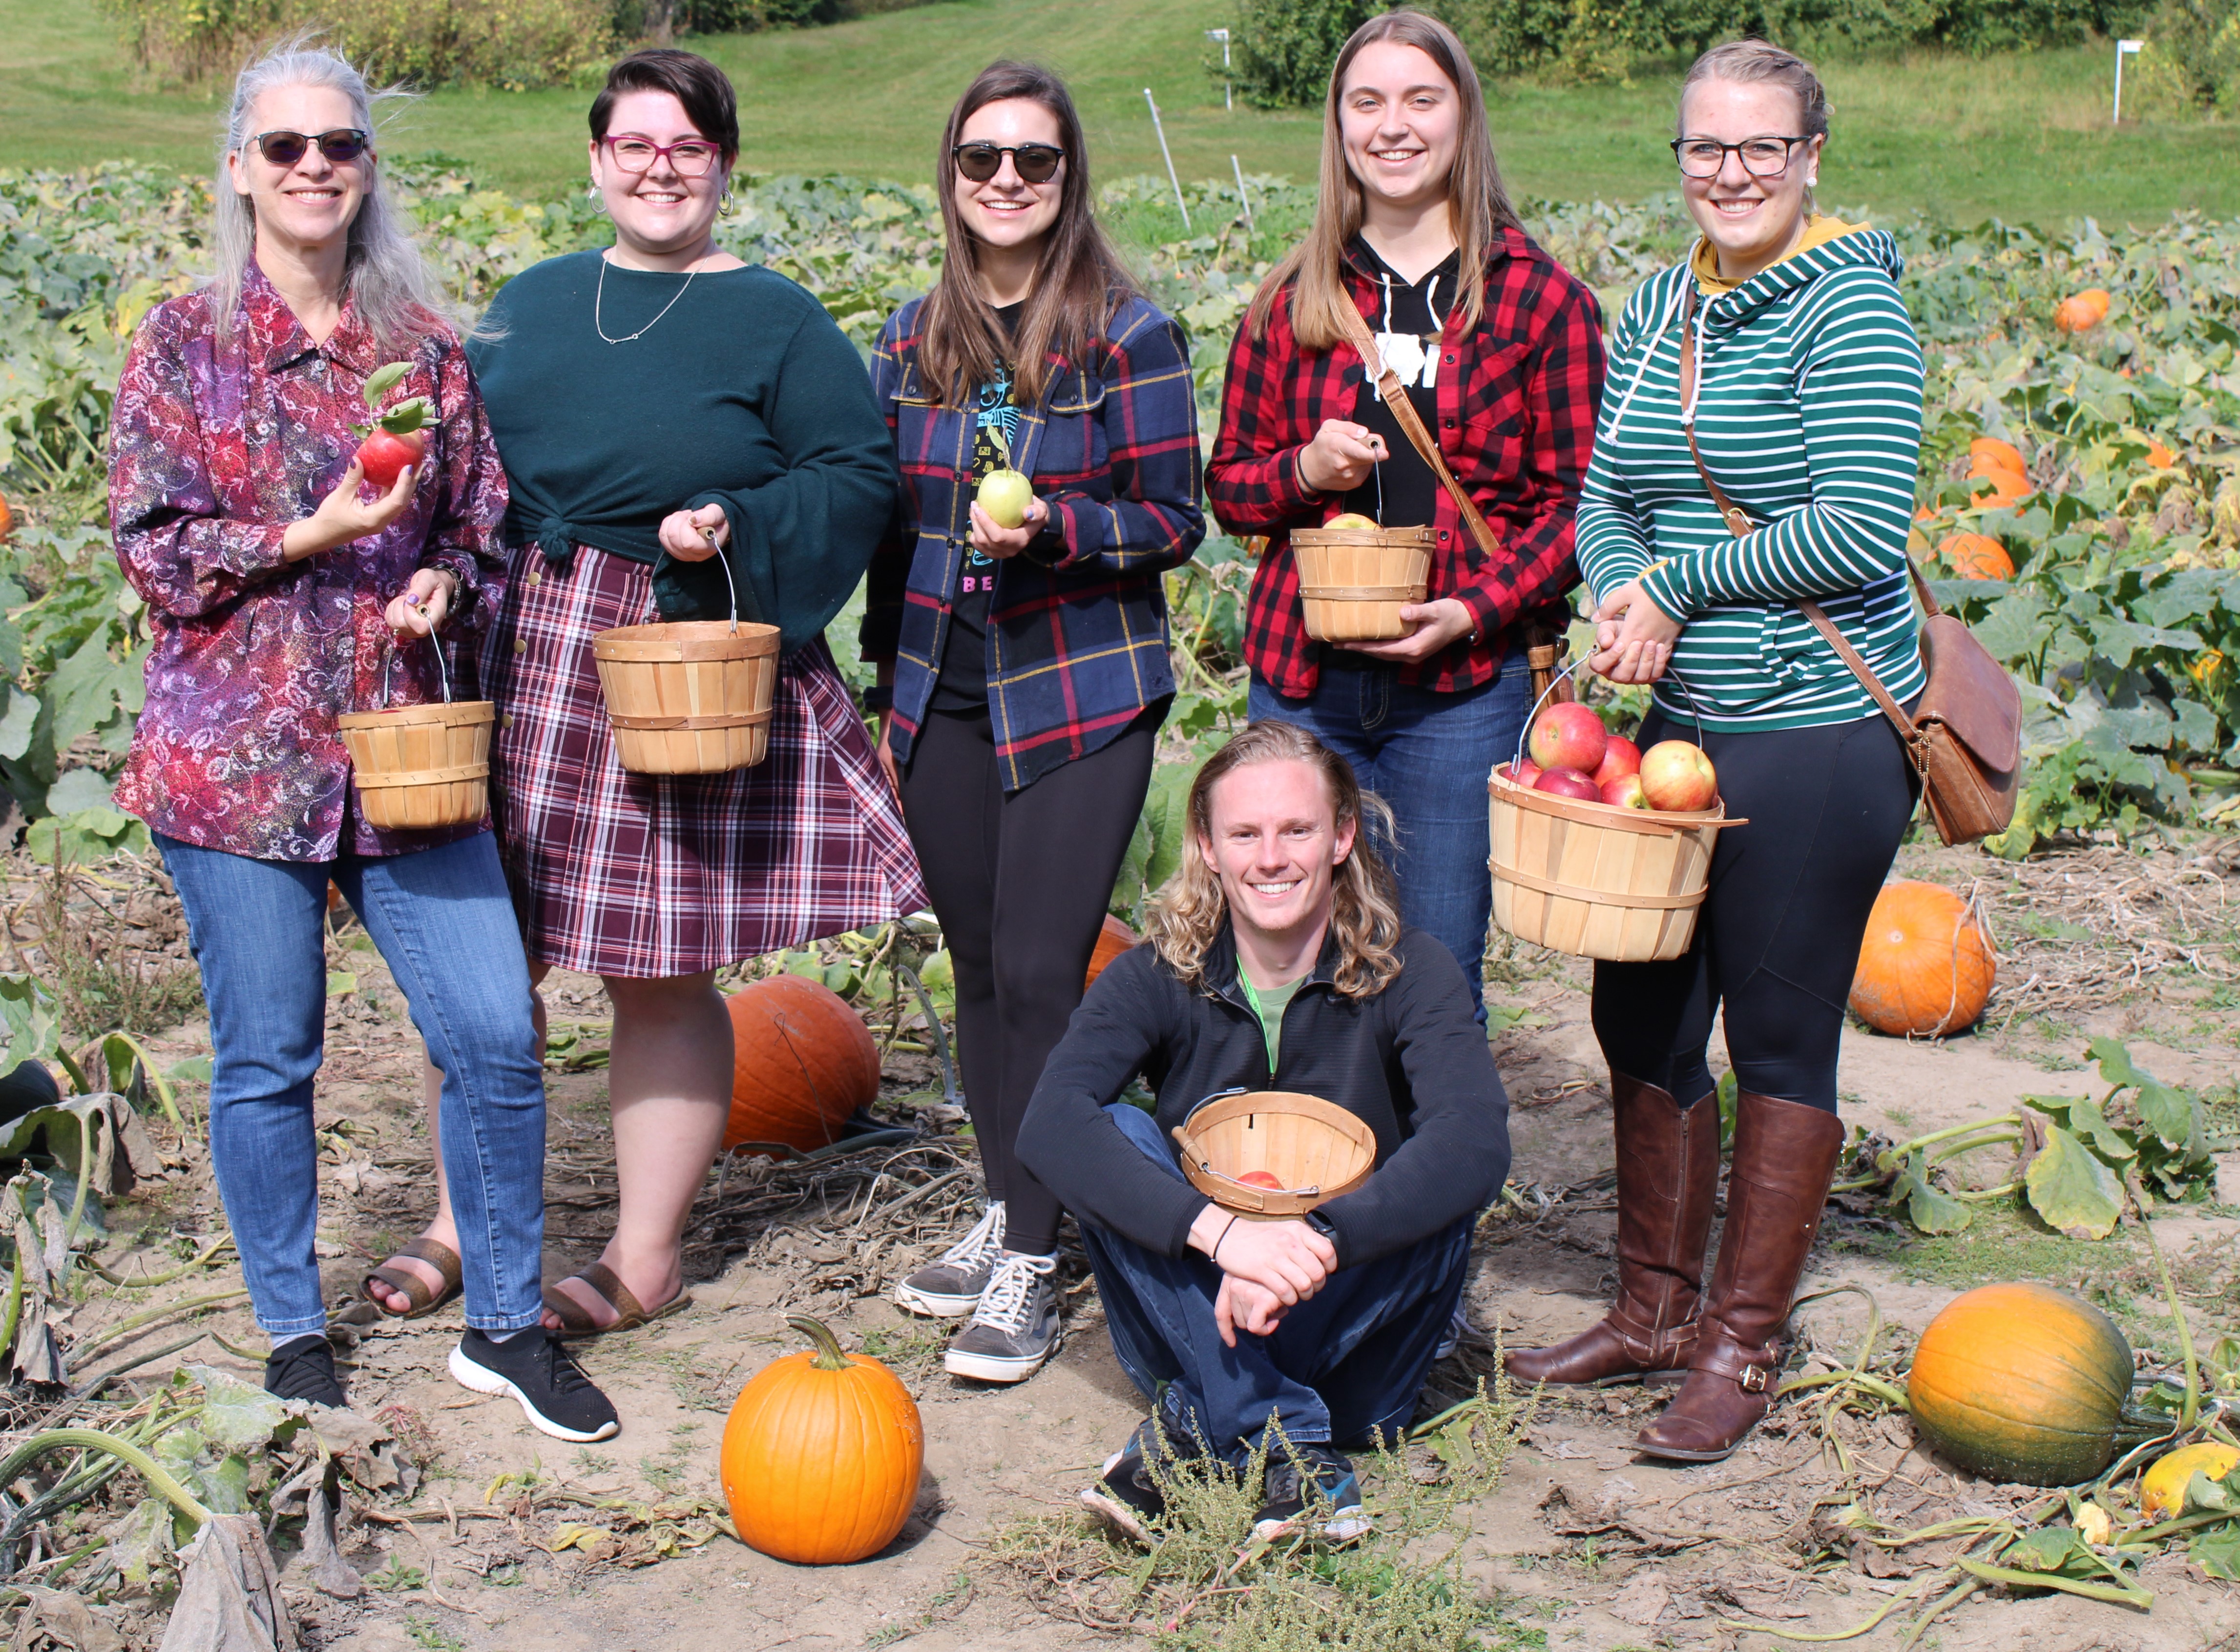 Cole group showing off their perfectly picked apples while standing in the pumpkin patch